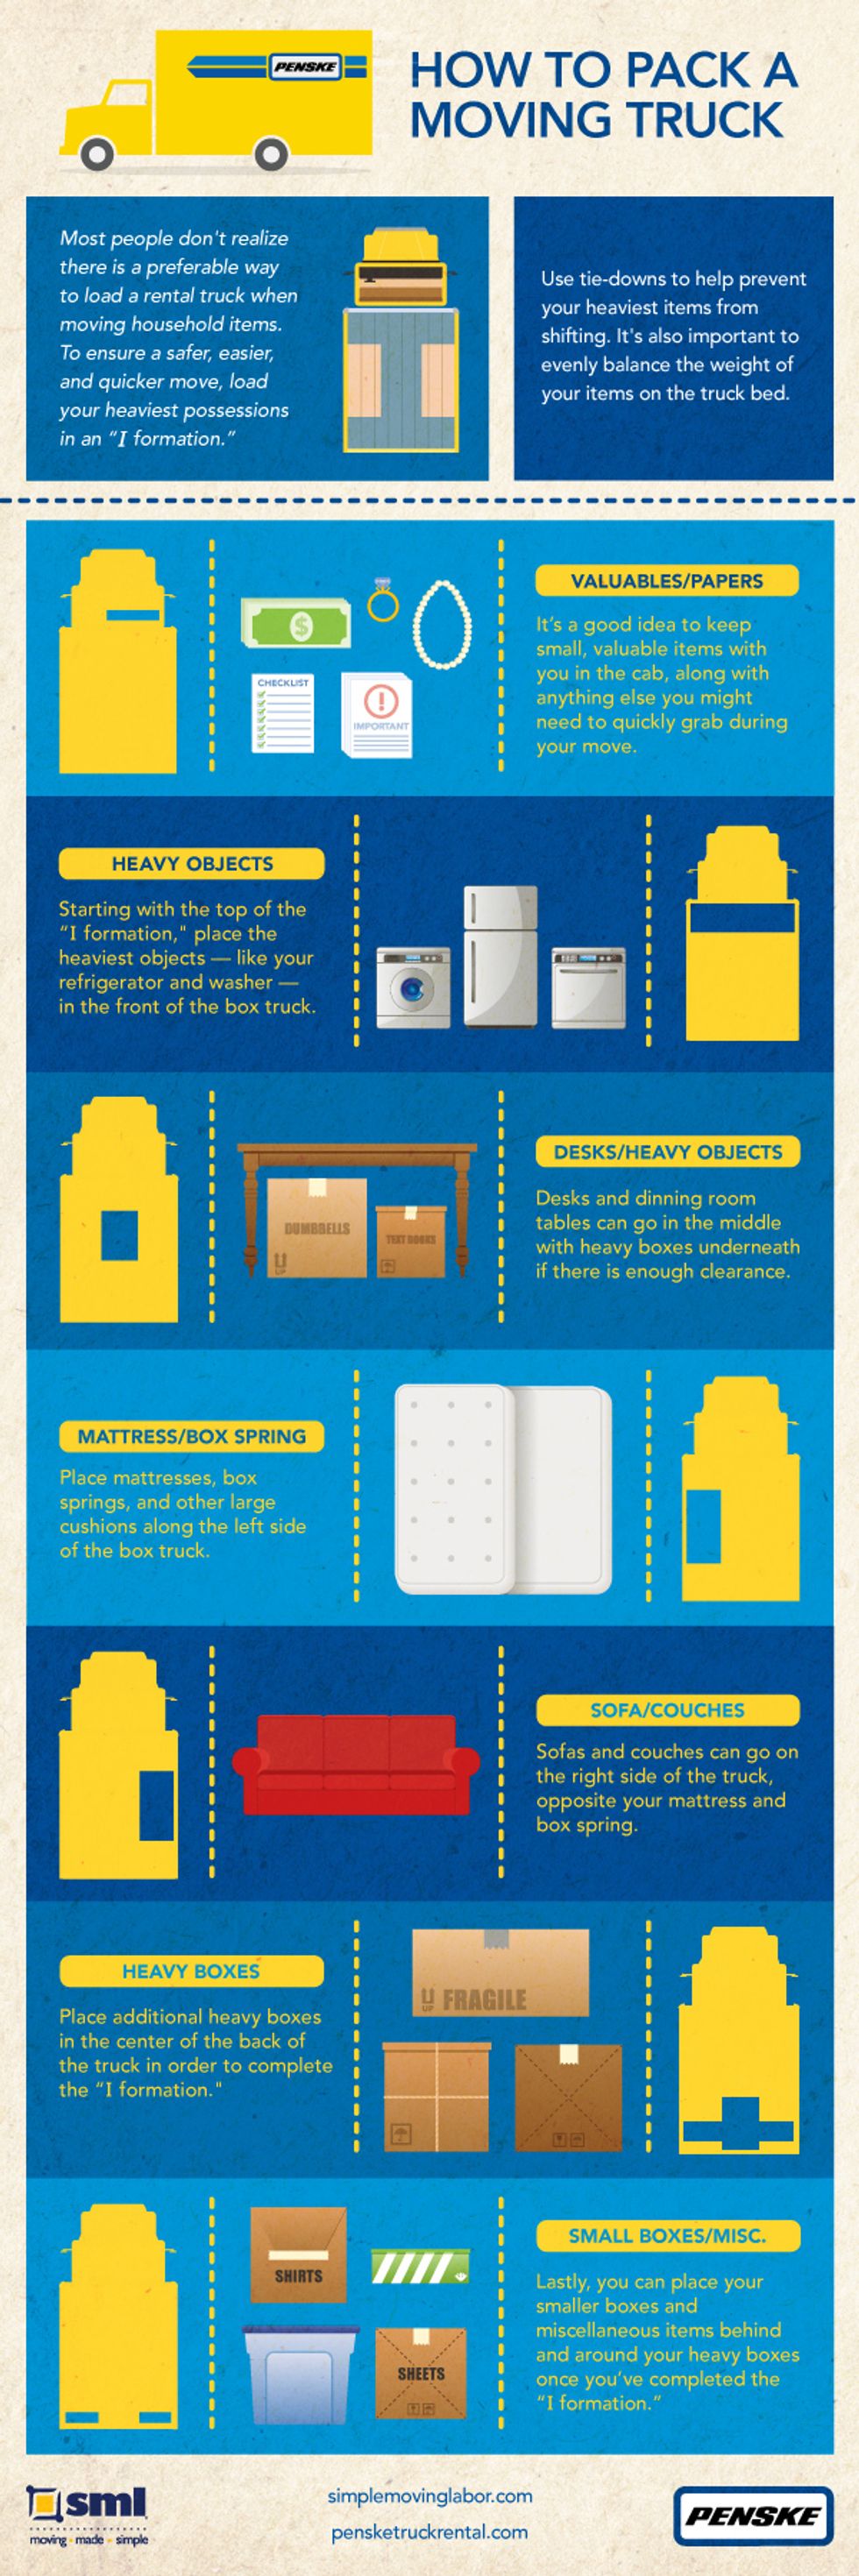 
Infographic: How to Pack a Penske Moving Truck
